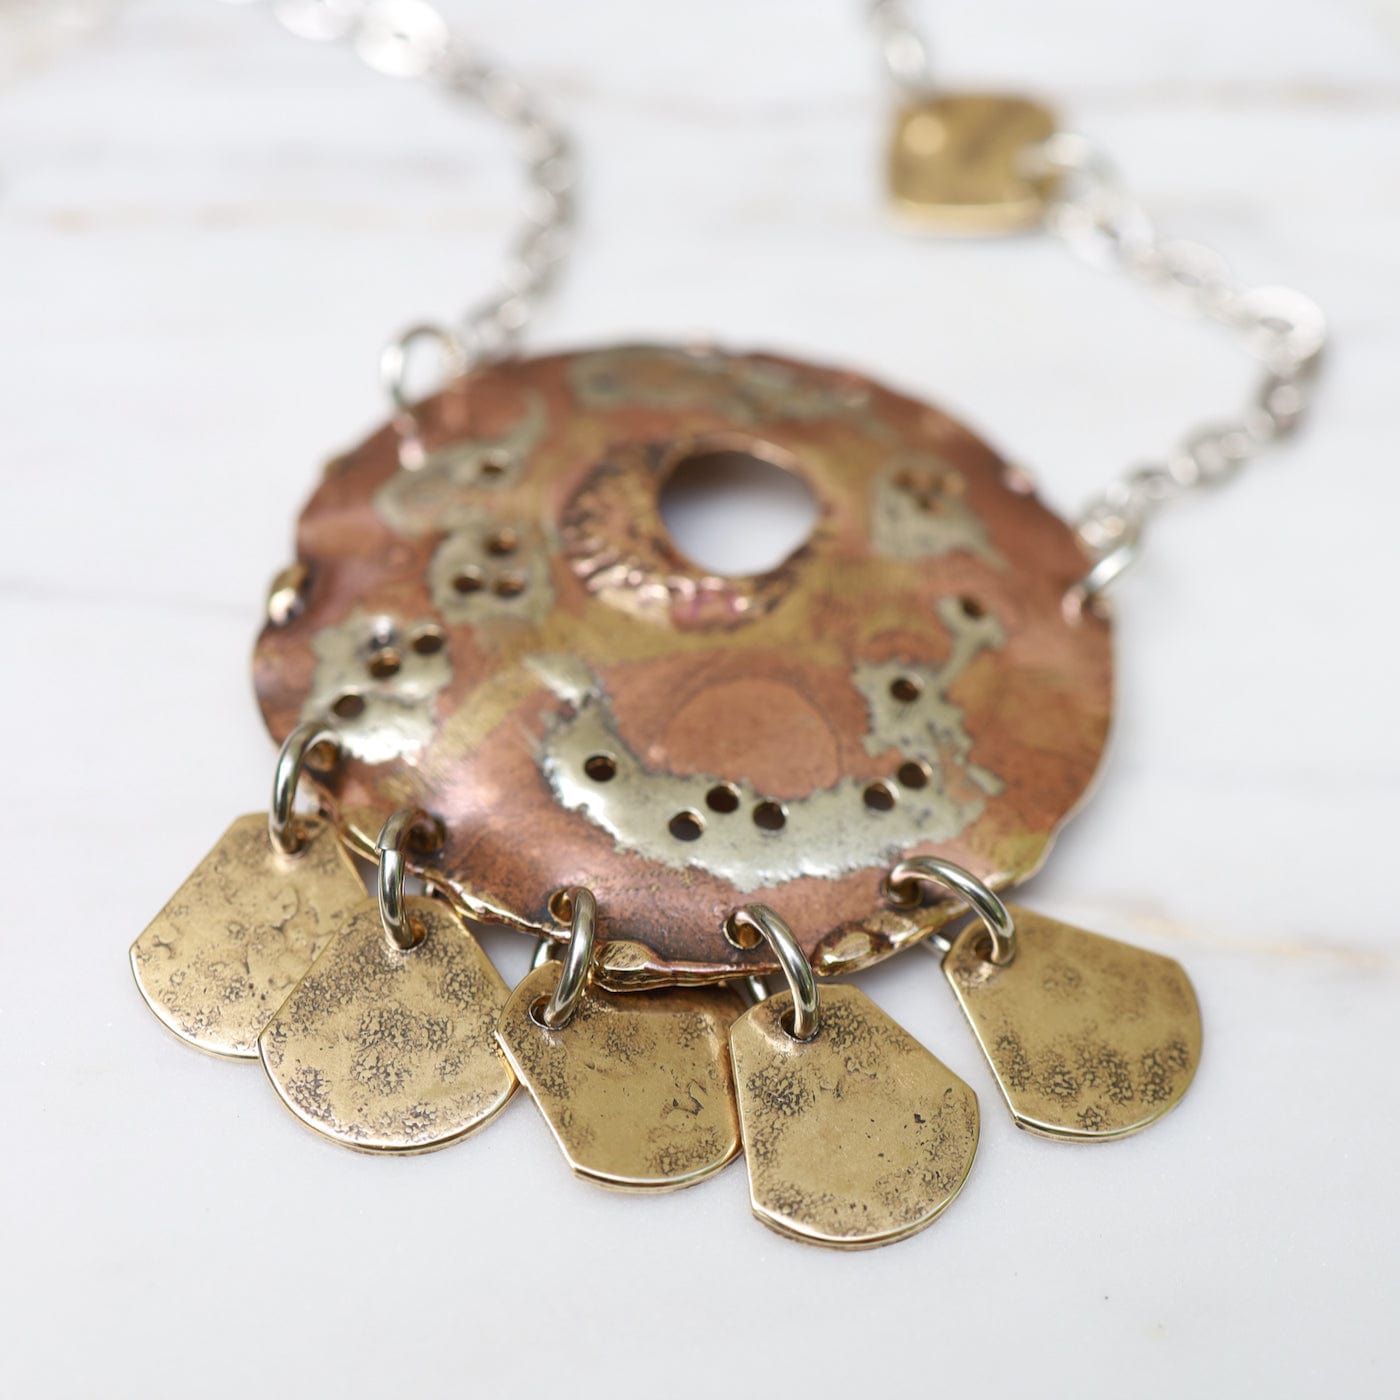 NKL Mixed Metal Medallion Necklace with Discs